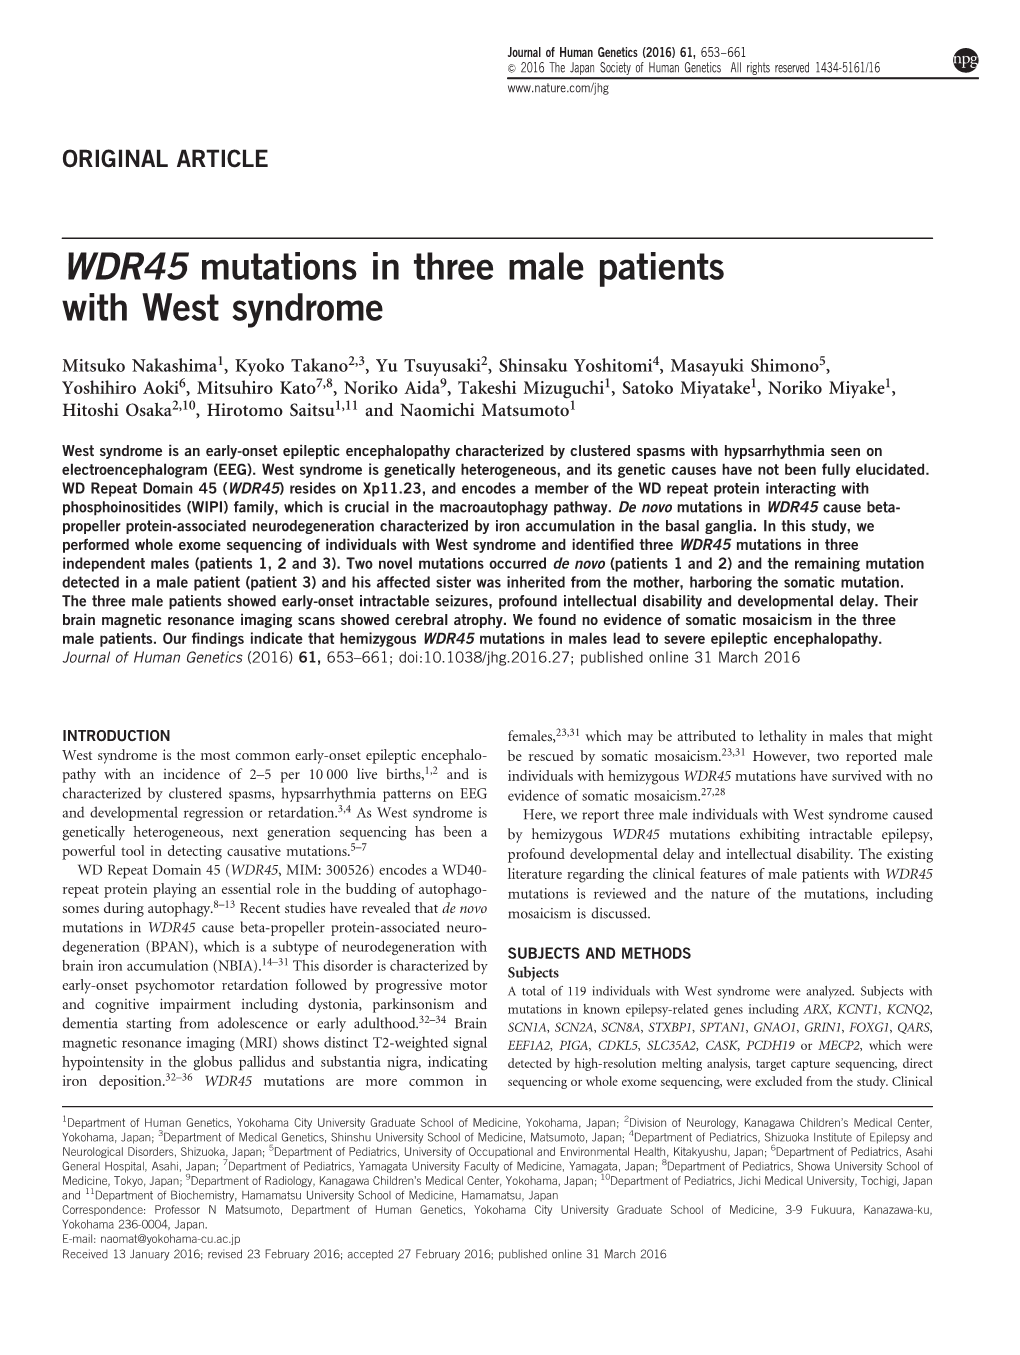 WDR45 Mutations in Three Male Patients with West Syndrome